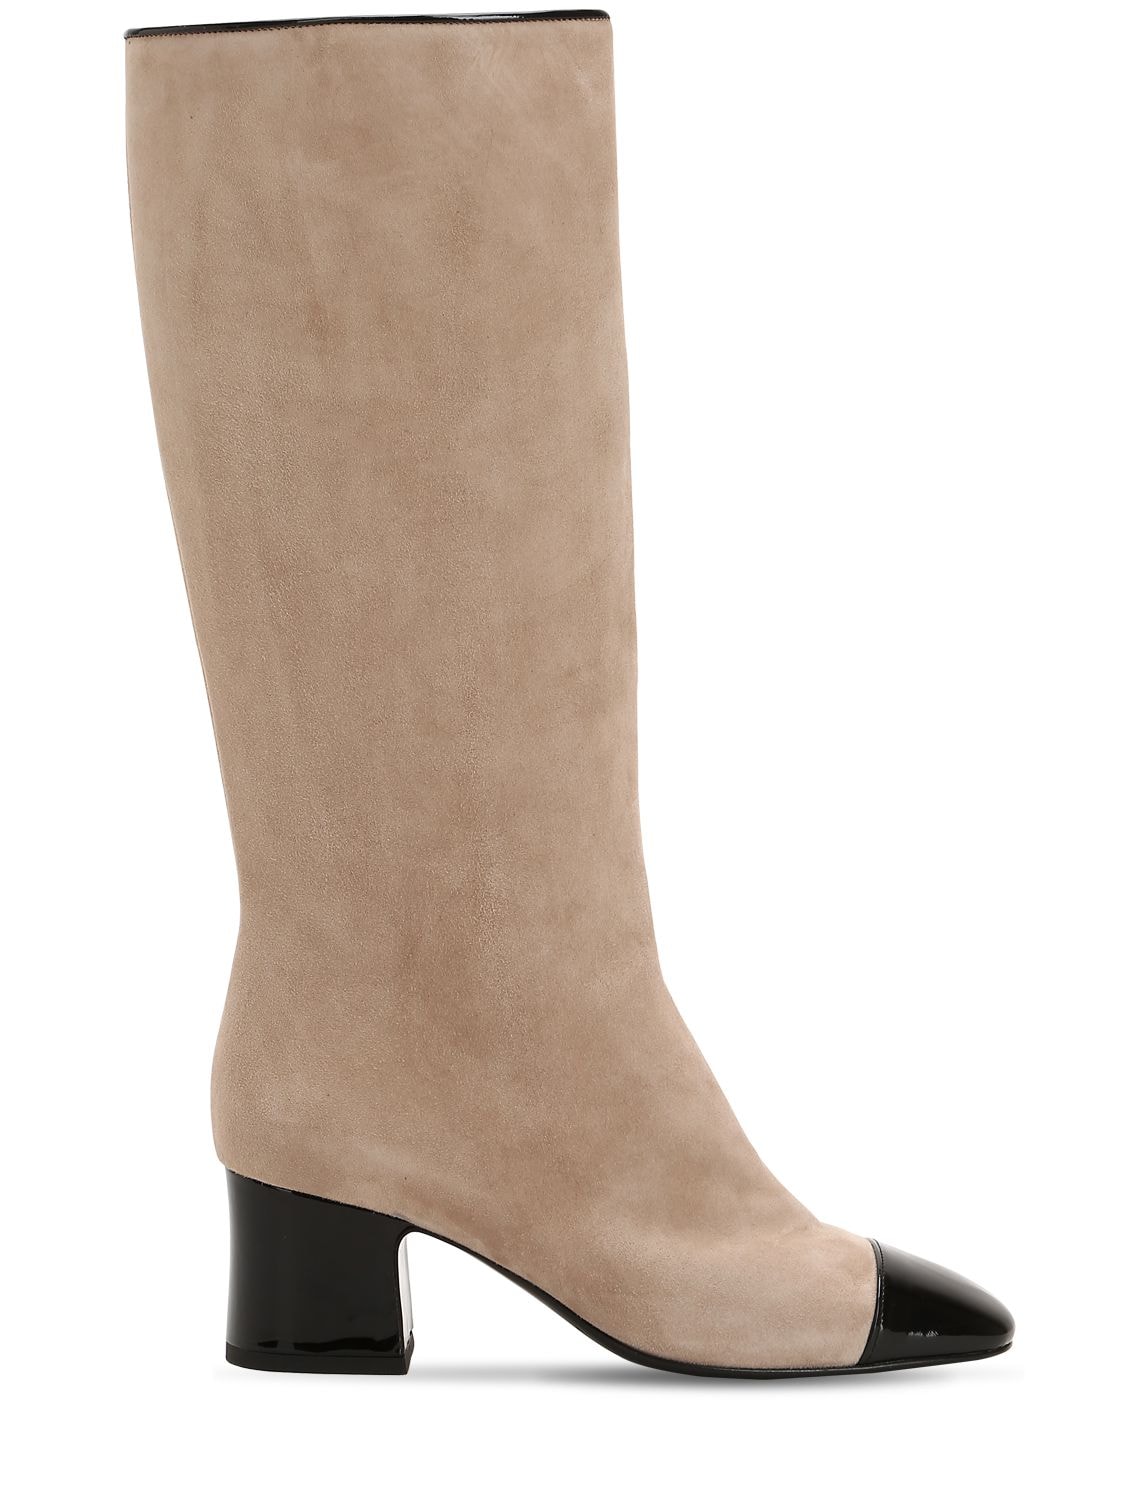 Aand 60mm Suede & Patent Leather Tall Boots In Beige,black